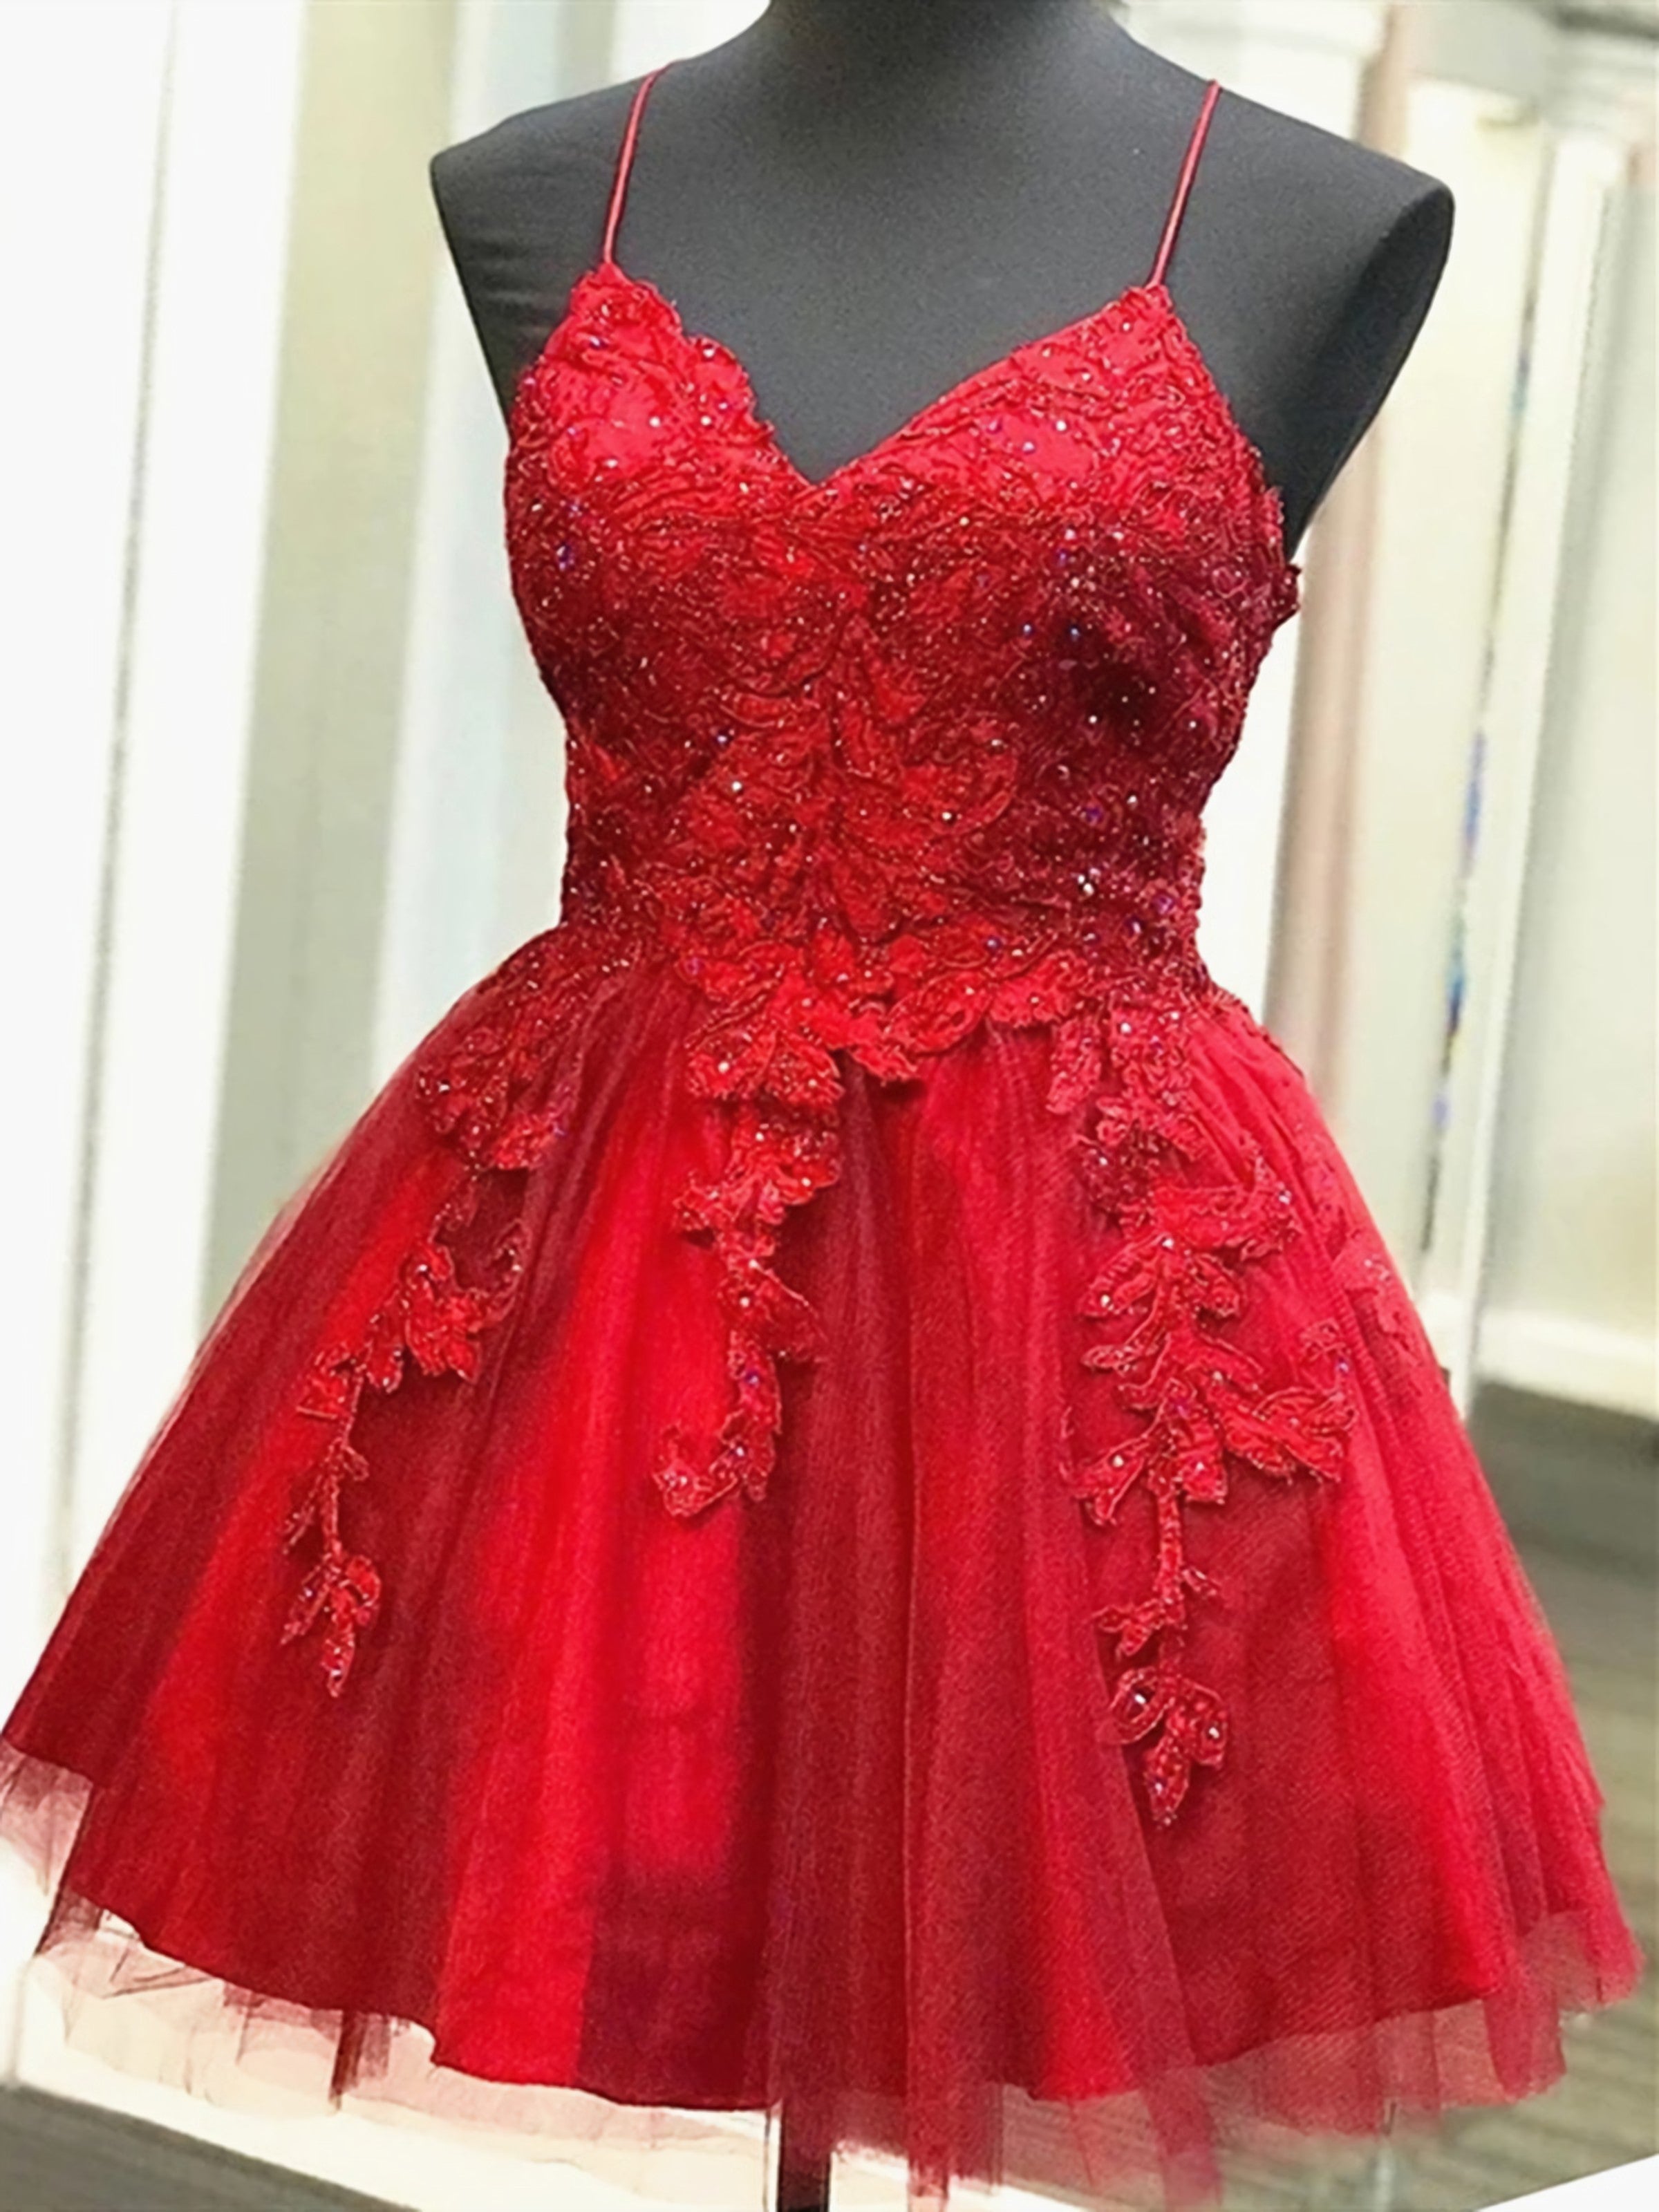 Party Dress Pattern Free, A Line V Neck Short Backless Red Lace Prom Dresses